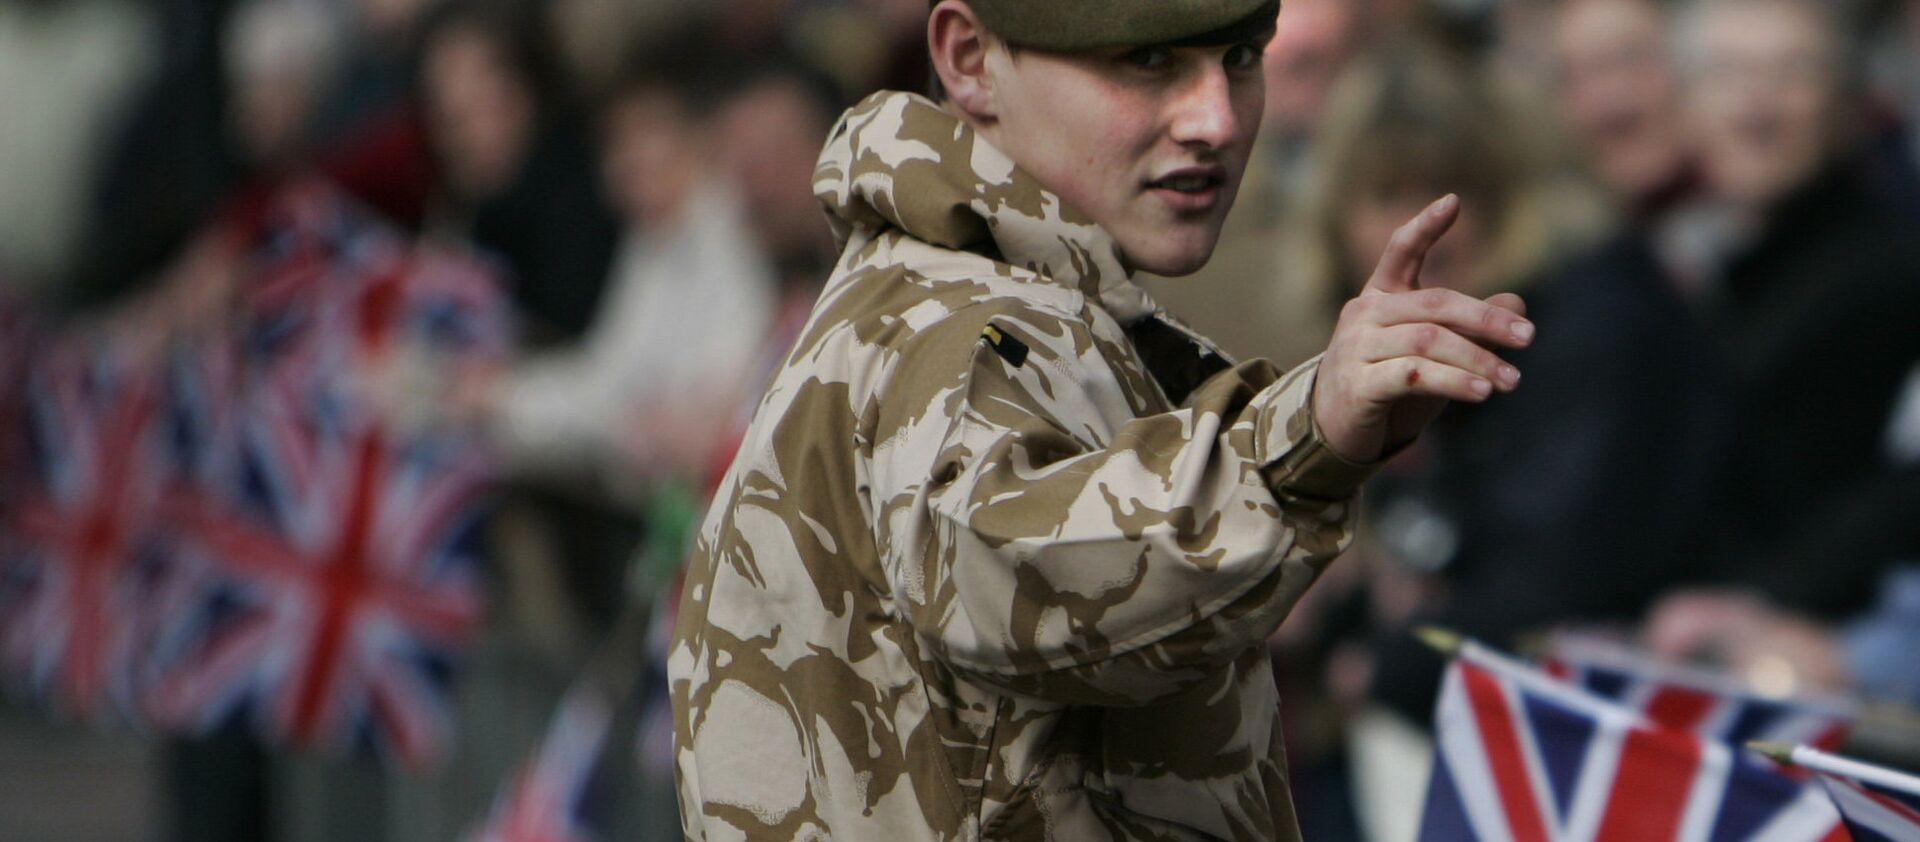 A British soldier from the 2nd Battalion, The Royal Anglian Regiment, talks to people prior to their parade through the town of Watford, England, Wednesday March 11, 2009. - اسپوتنیک افغانستان  , 1920, 02.07.2017